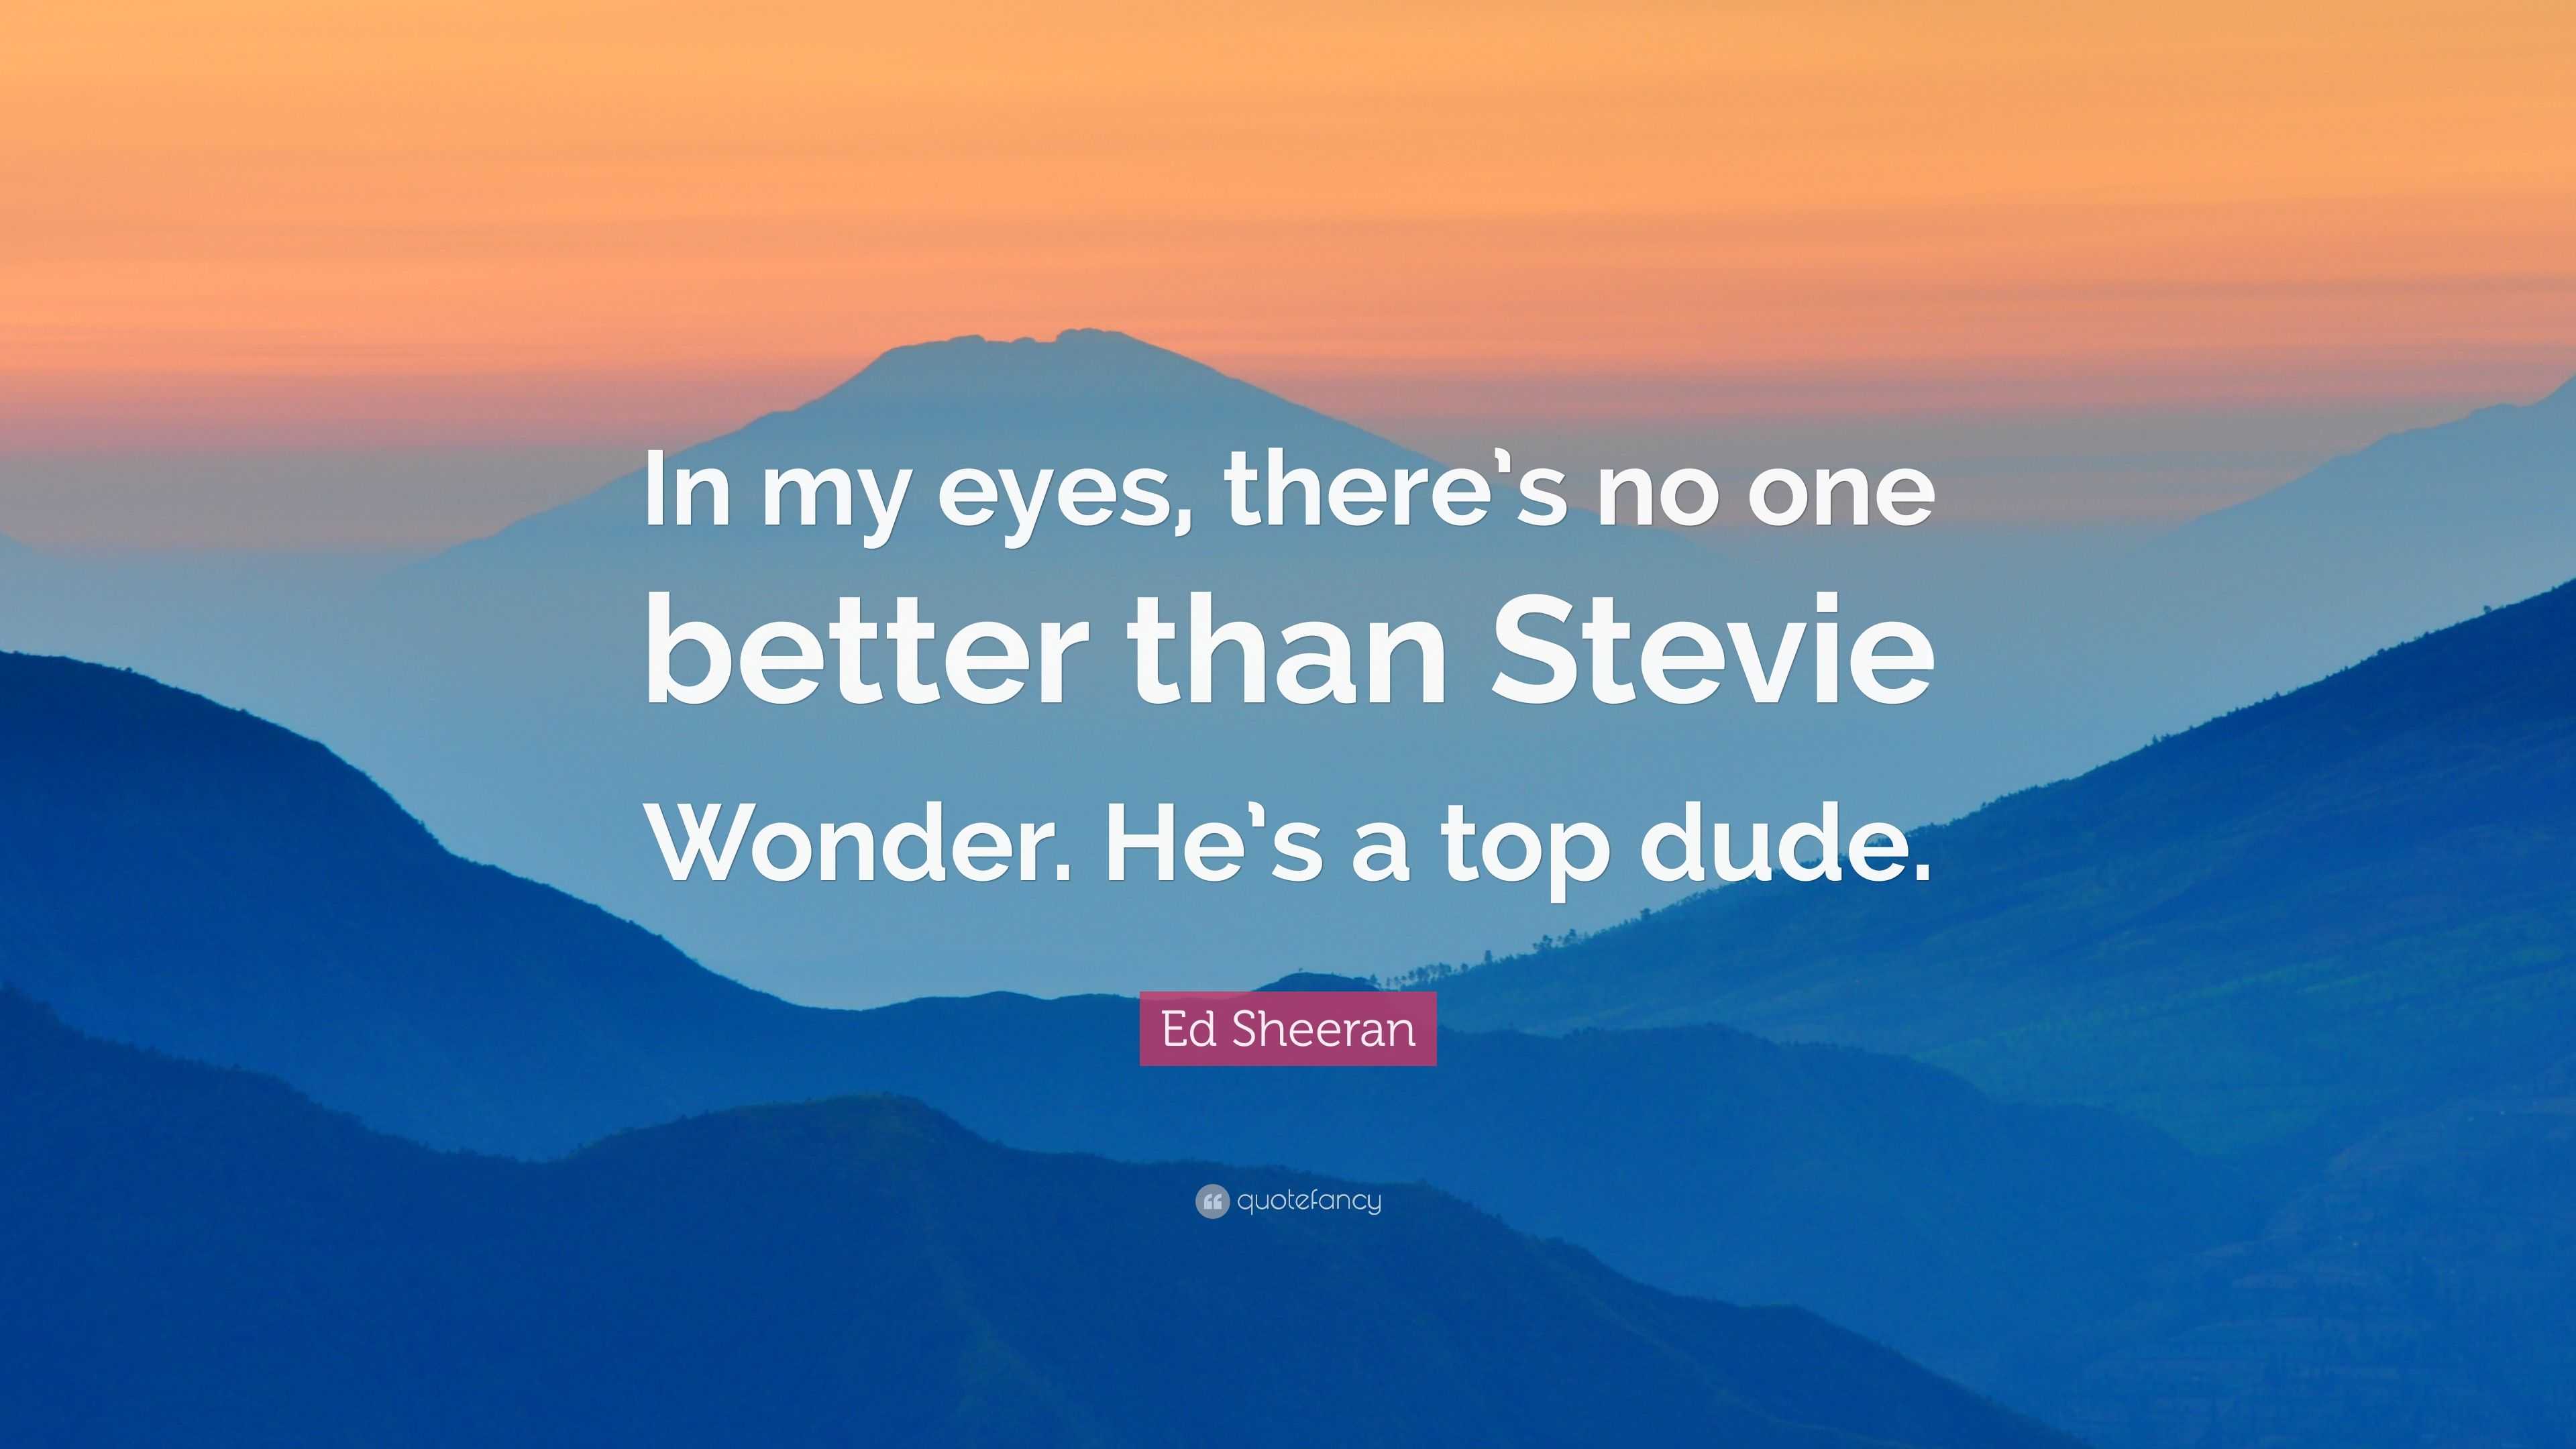 Ed Sheeran Quote “in My Eyes Theres No One Better Than Stevie Wonder Hes A Top Dude”